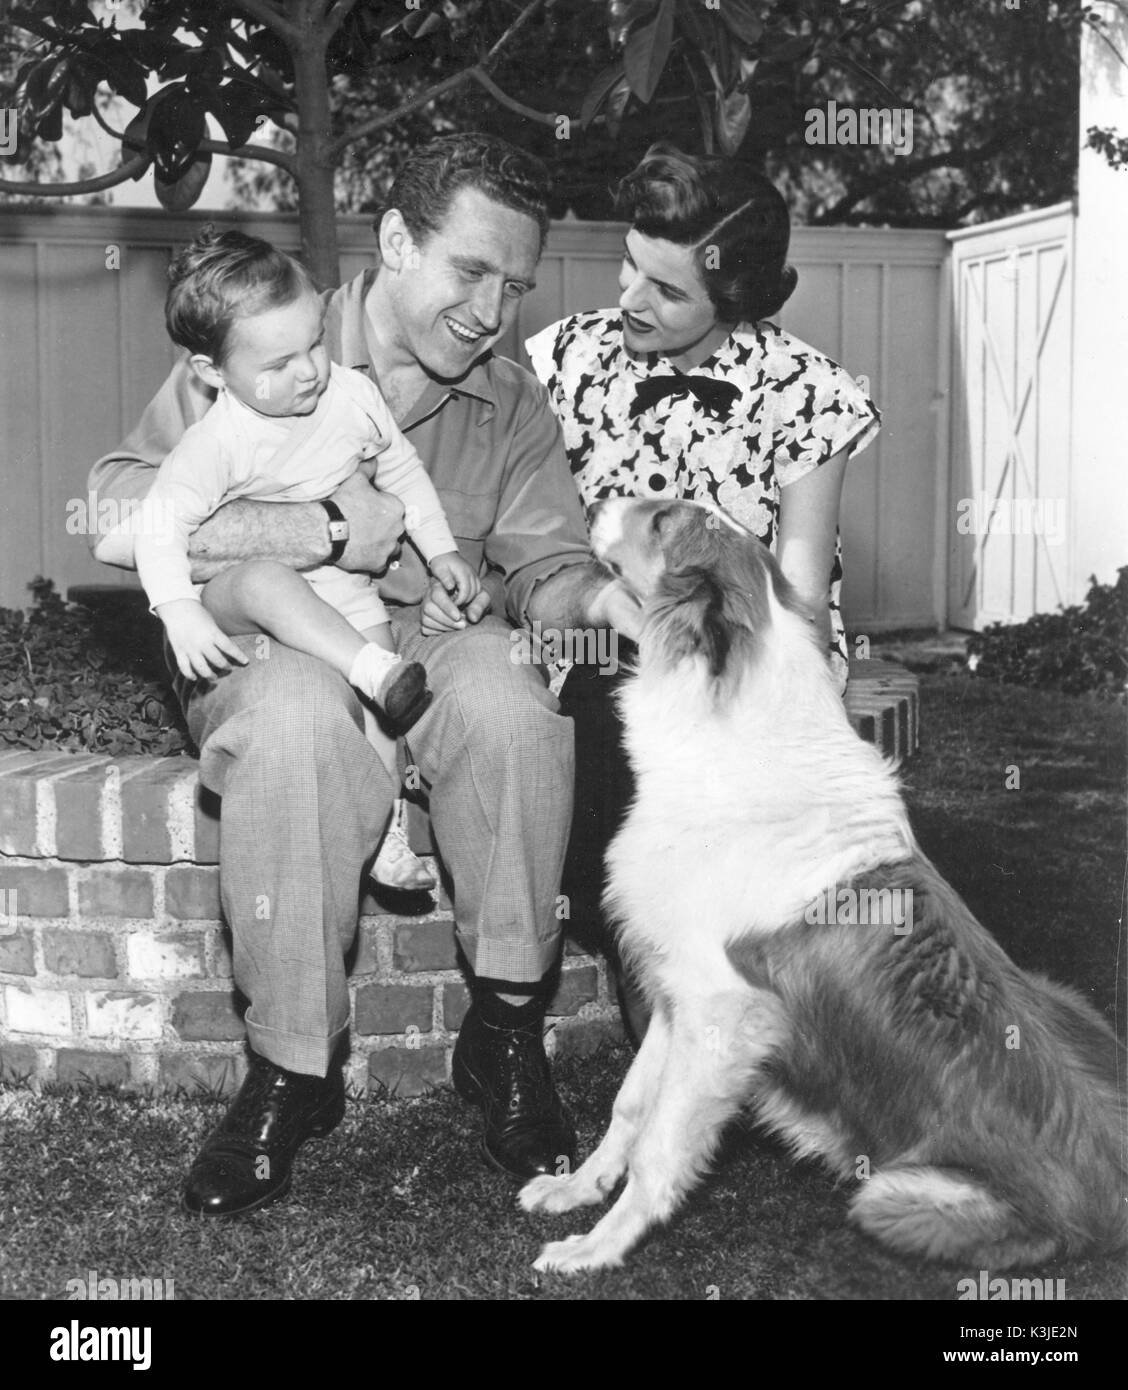 JAMES WHITMORE American actor With his wife Nancy Mygatt, their son James Whitmore III who as an adult is known as JAMES WHITMORE JNR a film and television actor and director, with in front, LADDIE the grandson of LASSIE the canine film star JAMES WHITMORE Stock Photo